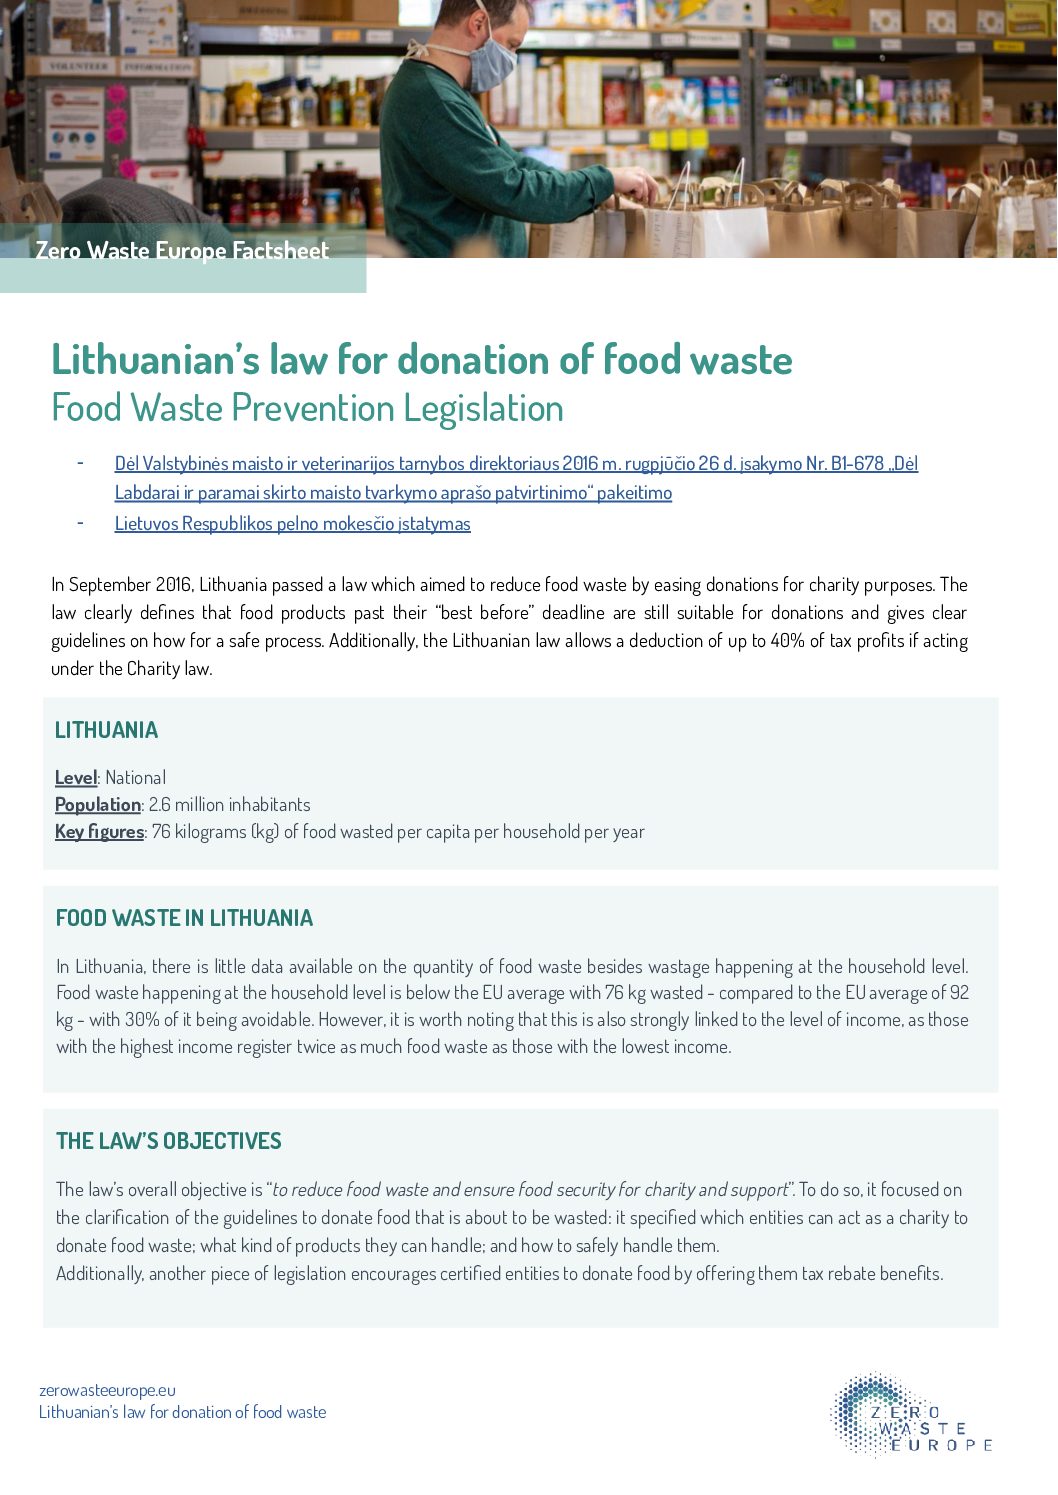 Lithuania’s law for donation of food waste